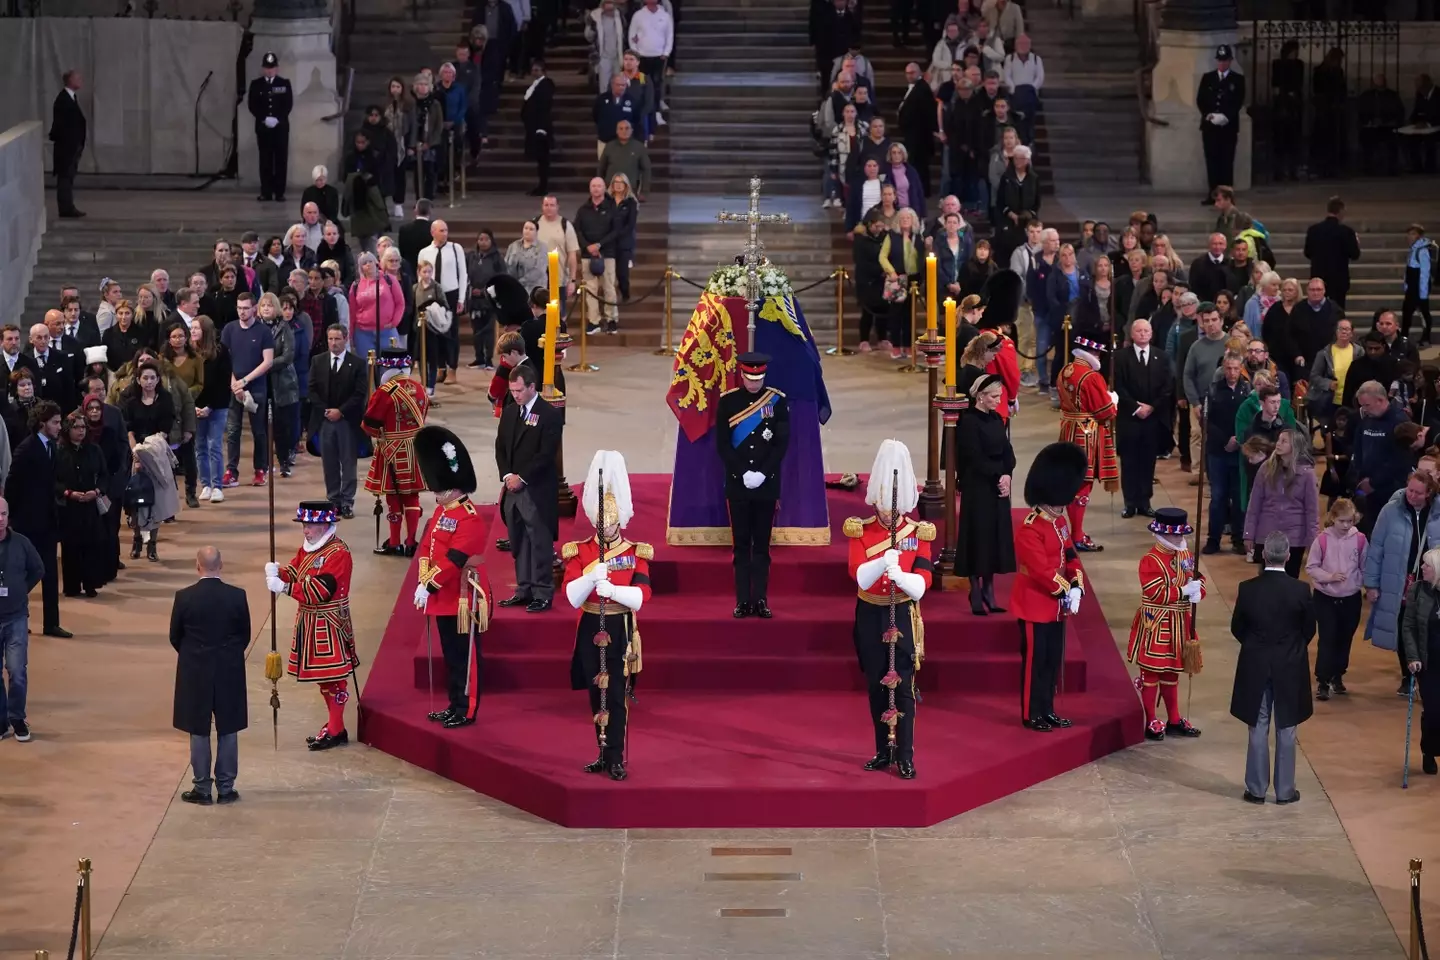 The Queen's funeral will be held at Westminster Abbey.